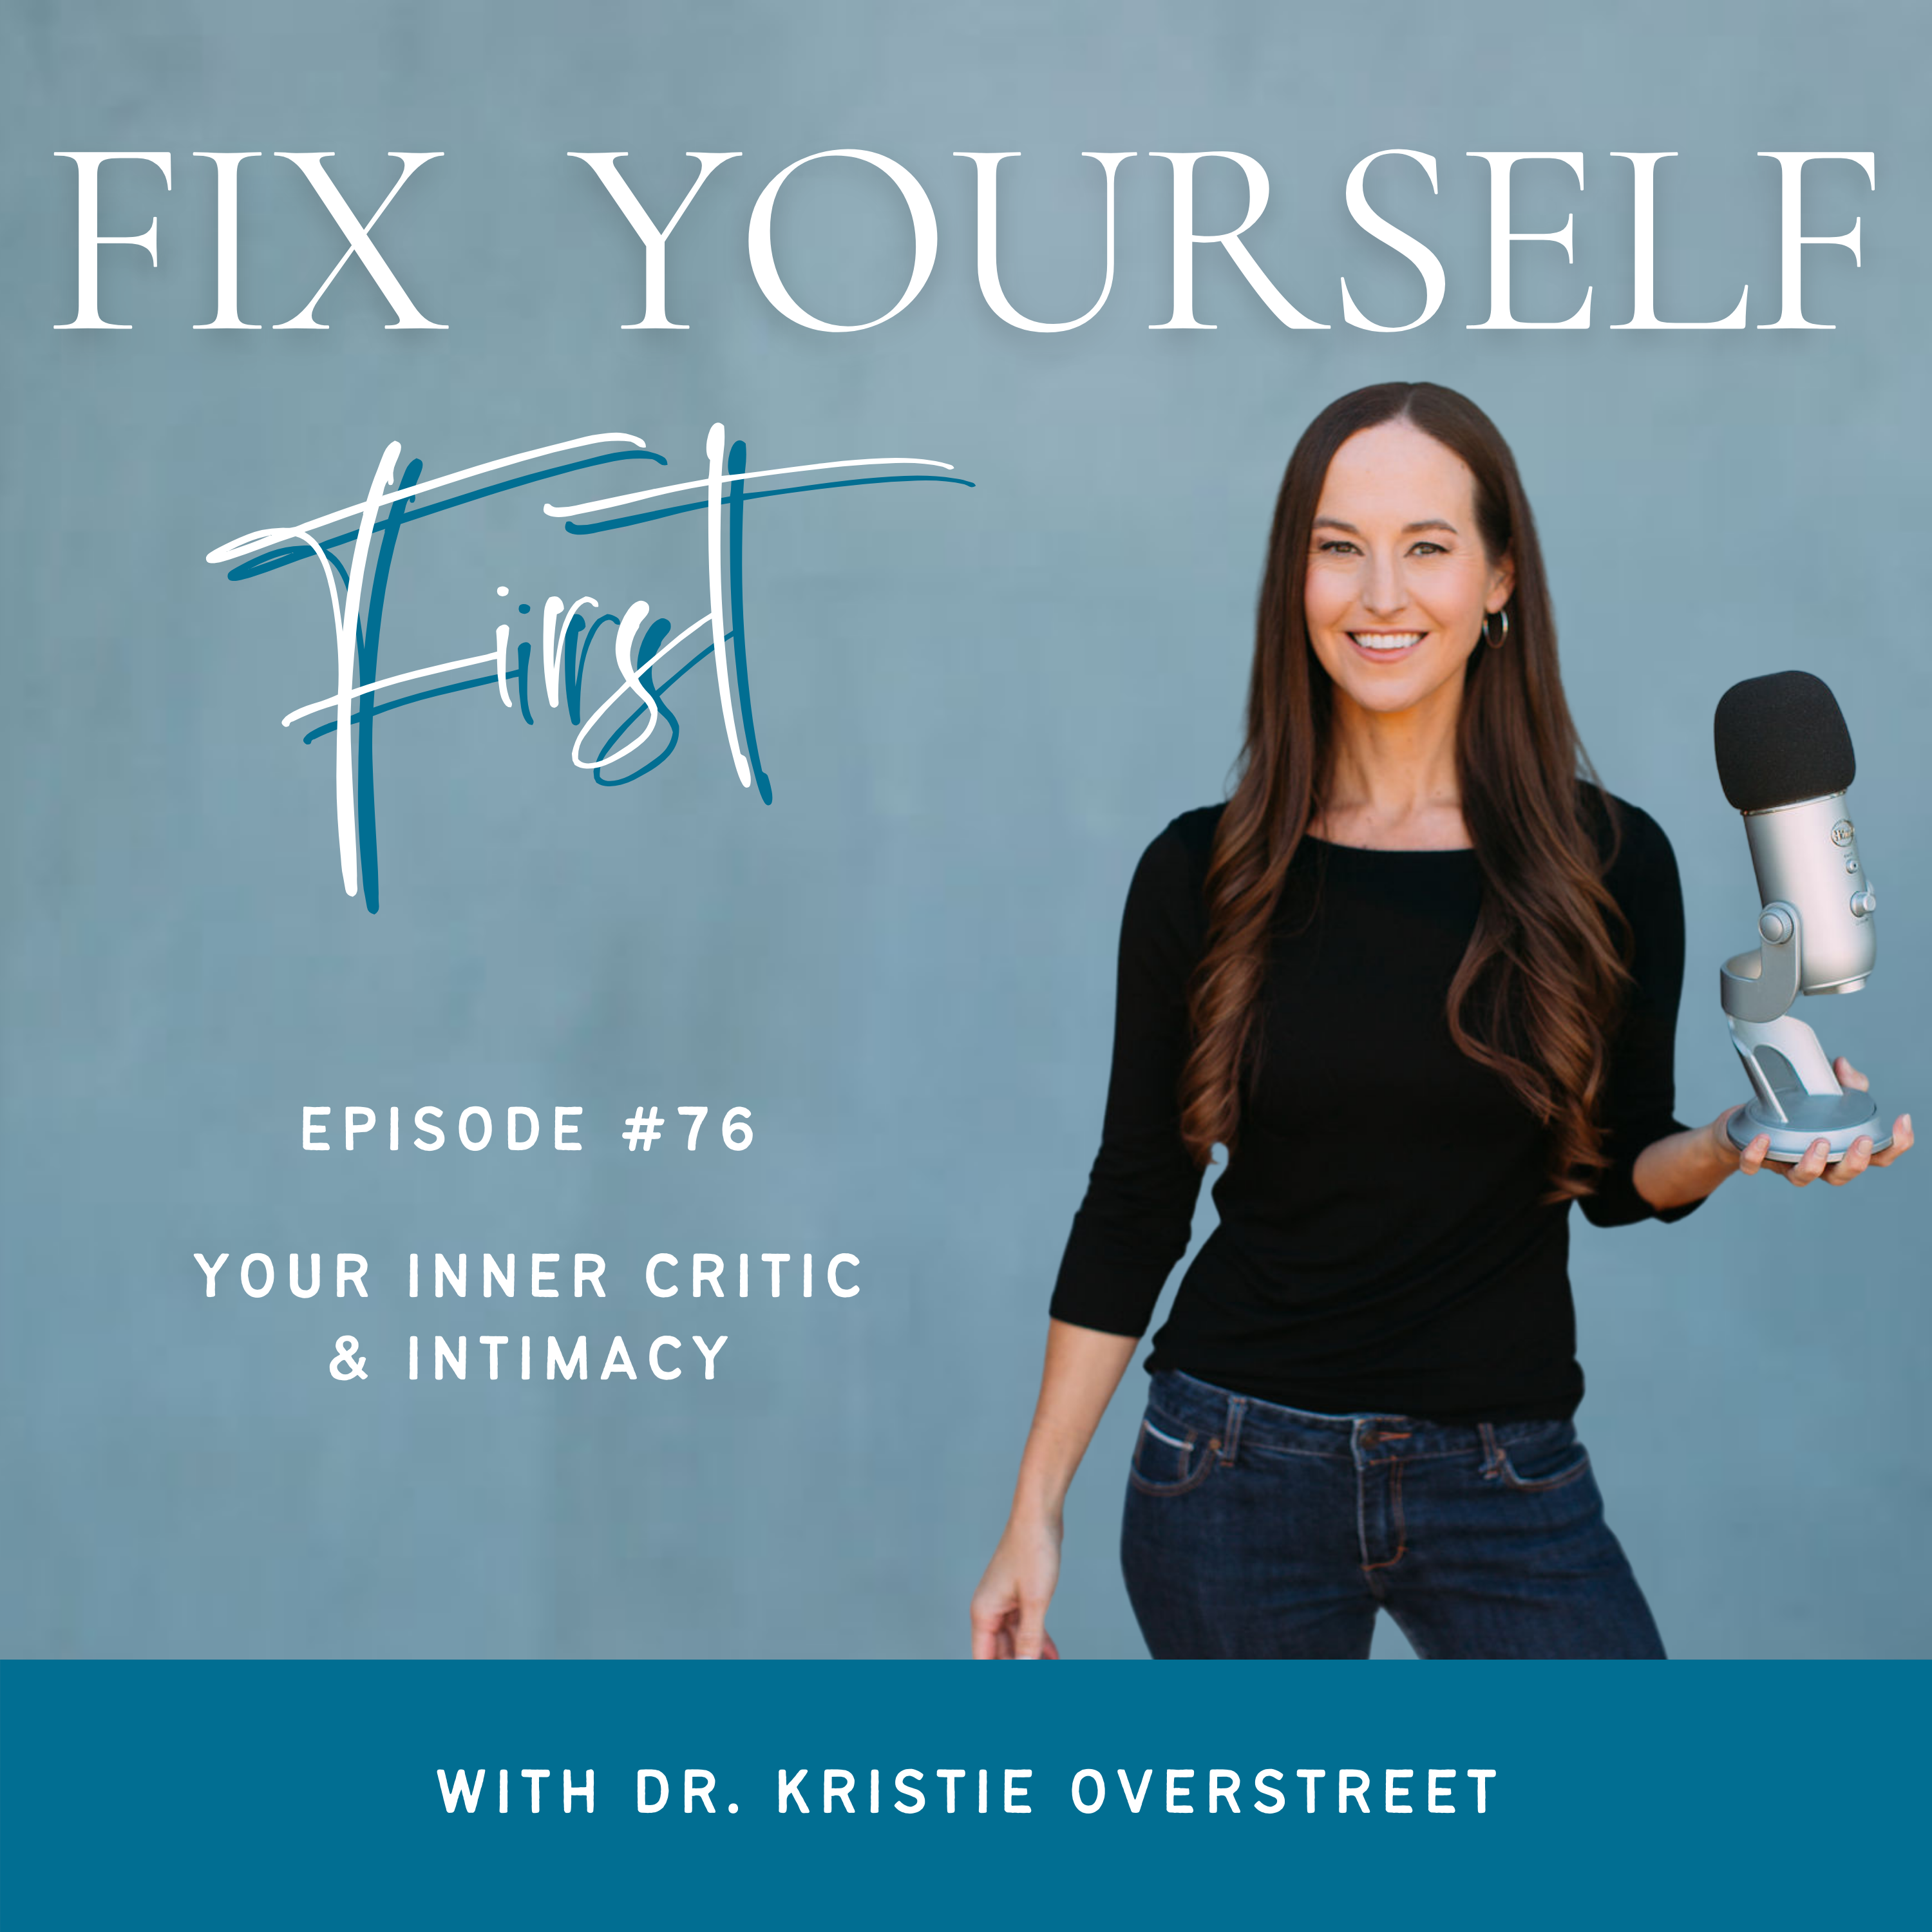 Fix Yourself First - Episode 76